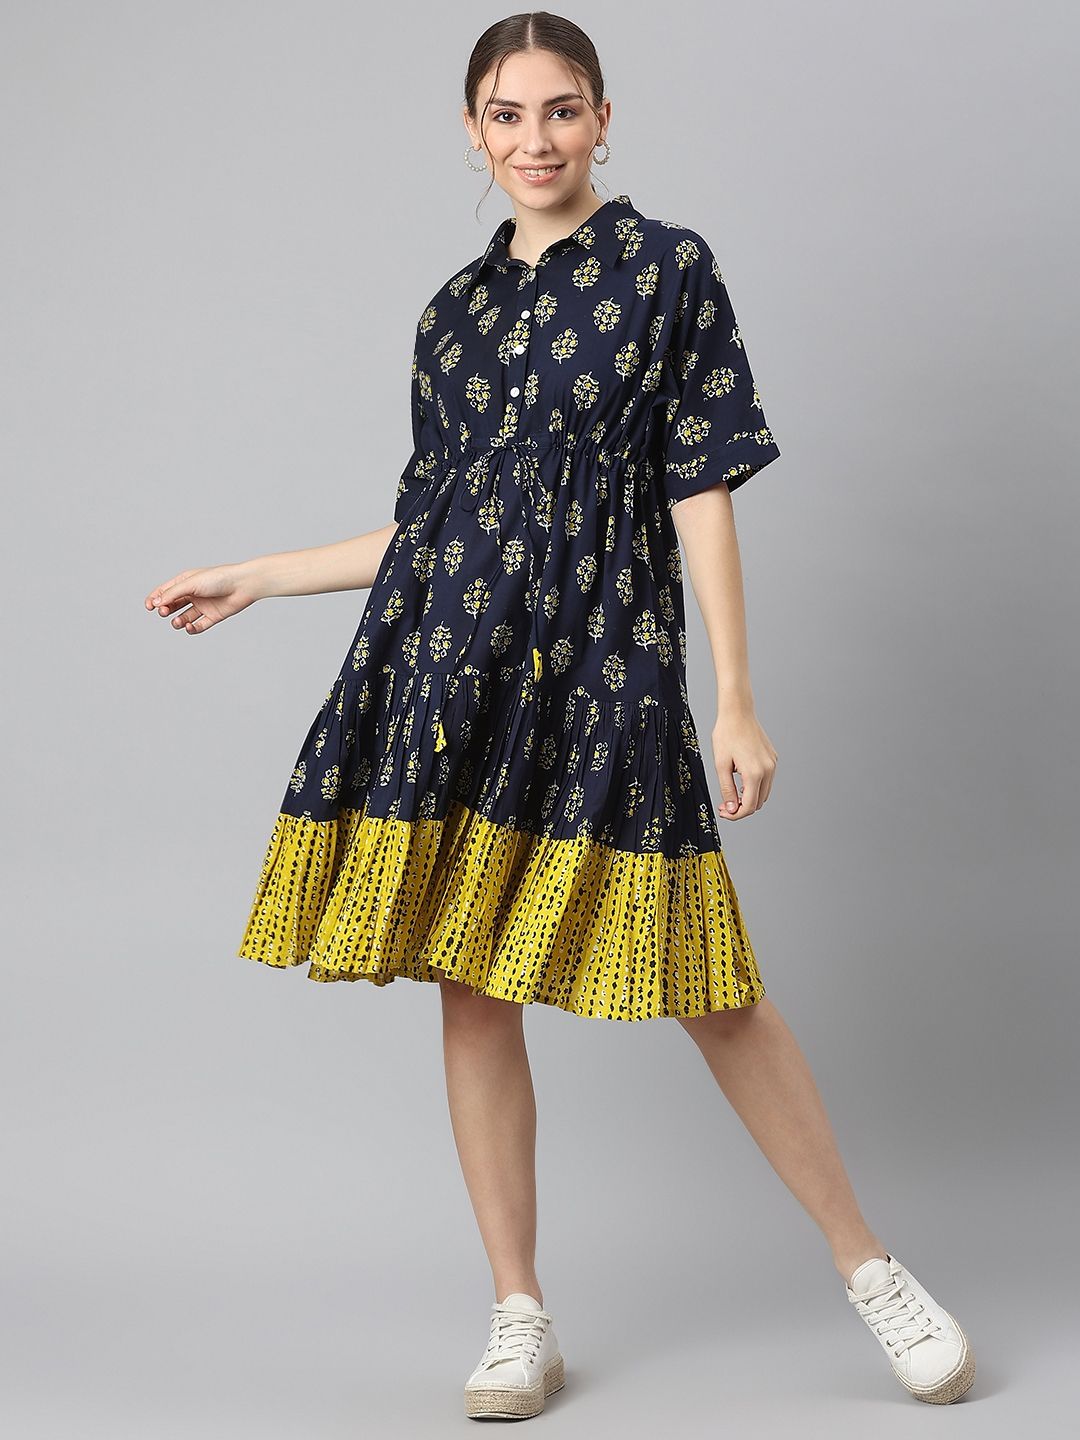 KALINI Navy Blue & Yellow Ethnic Motifs Cotton A-Line Dress Price in India